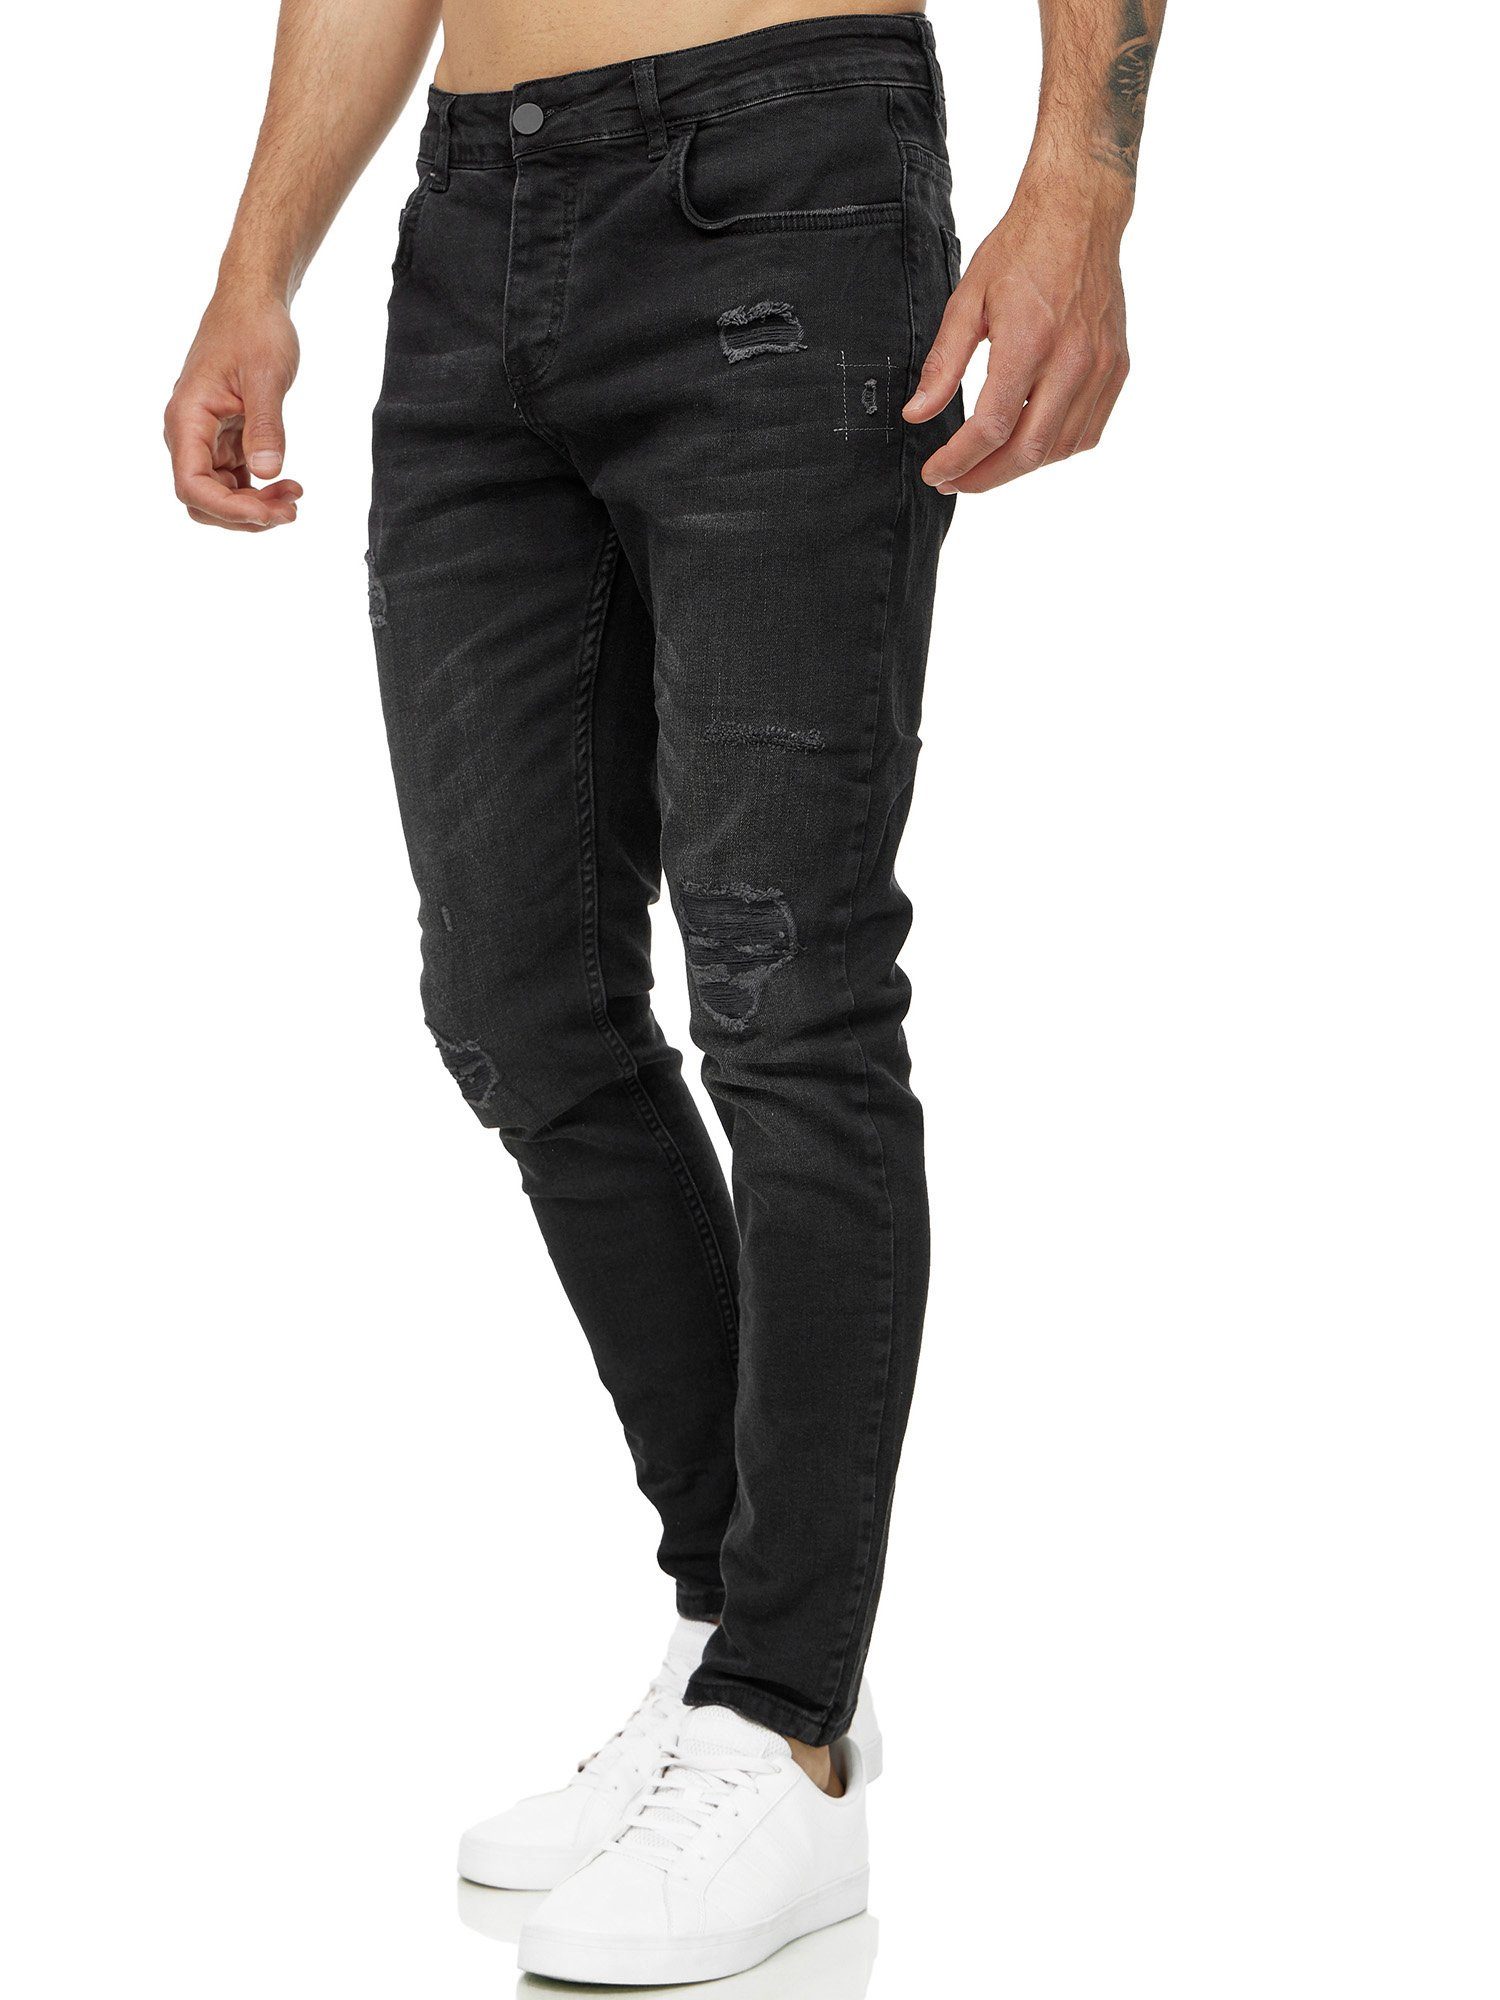 Stretch & im Tazzio mit Destroyed-Look Skinny-fit-Jeans A107 Elasthan